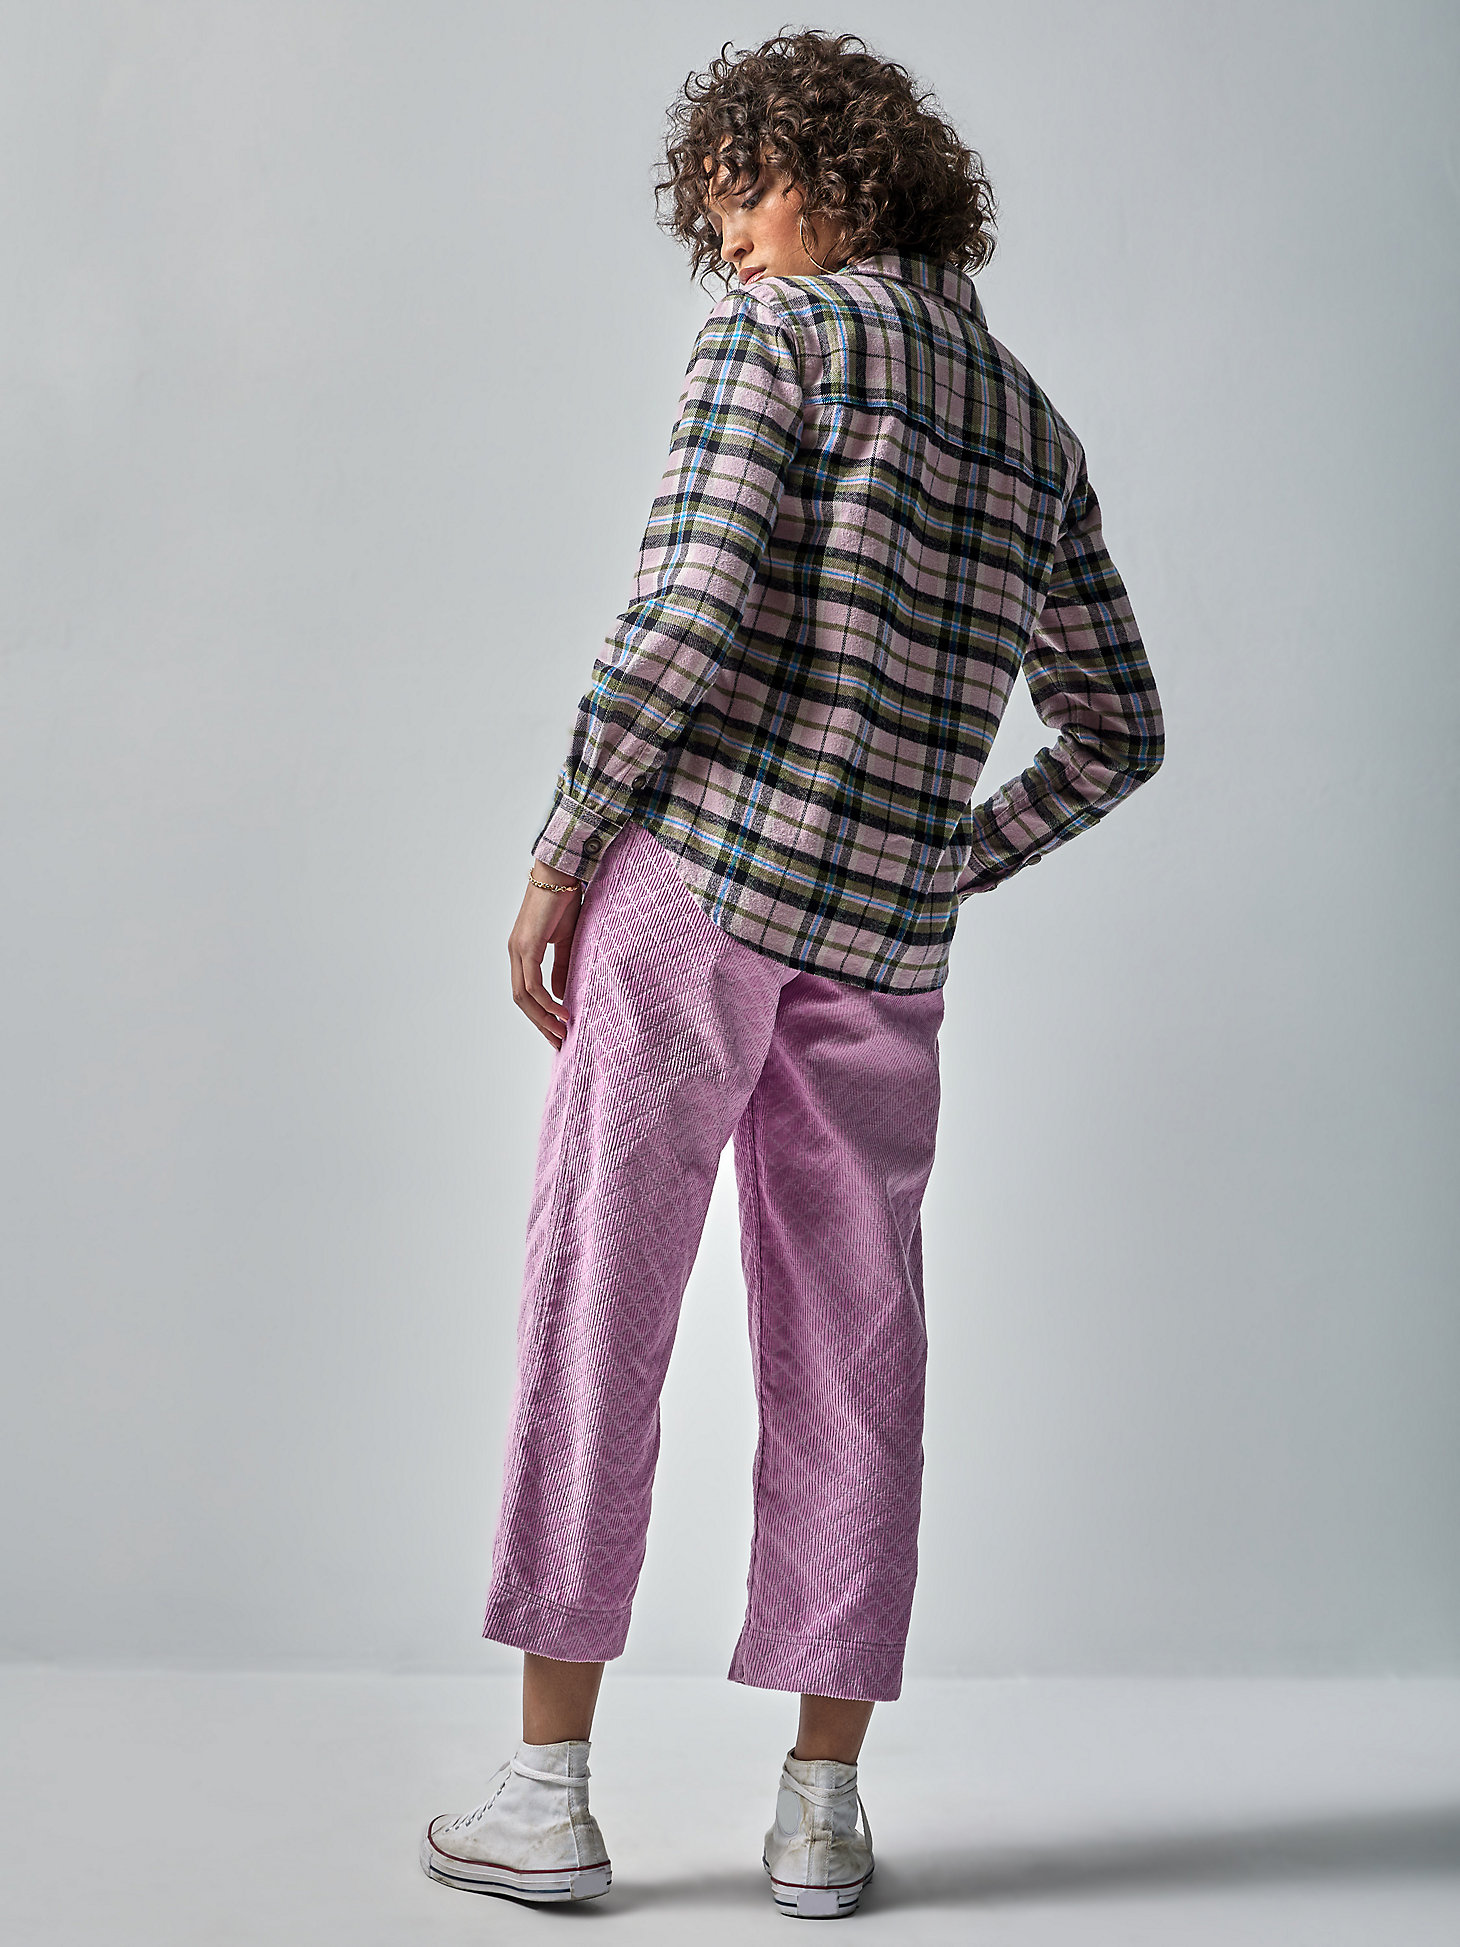 Women's Lee® x The Brooklyn Circus® Plaid Overshirt in Soft Misty Plaid alternative view 1